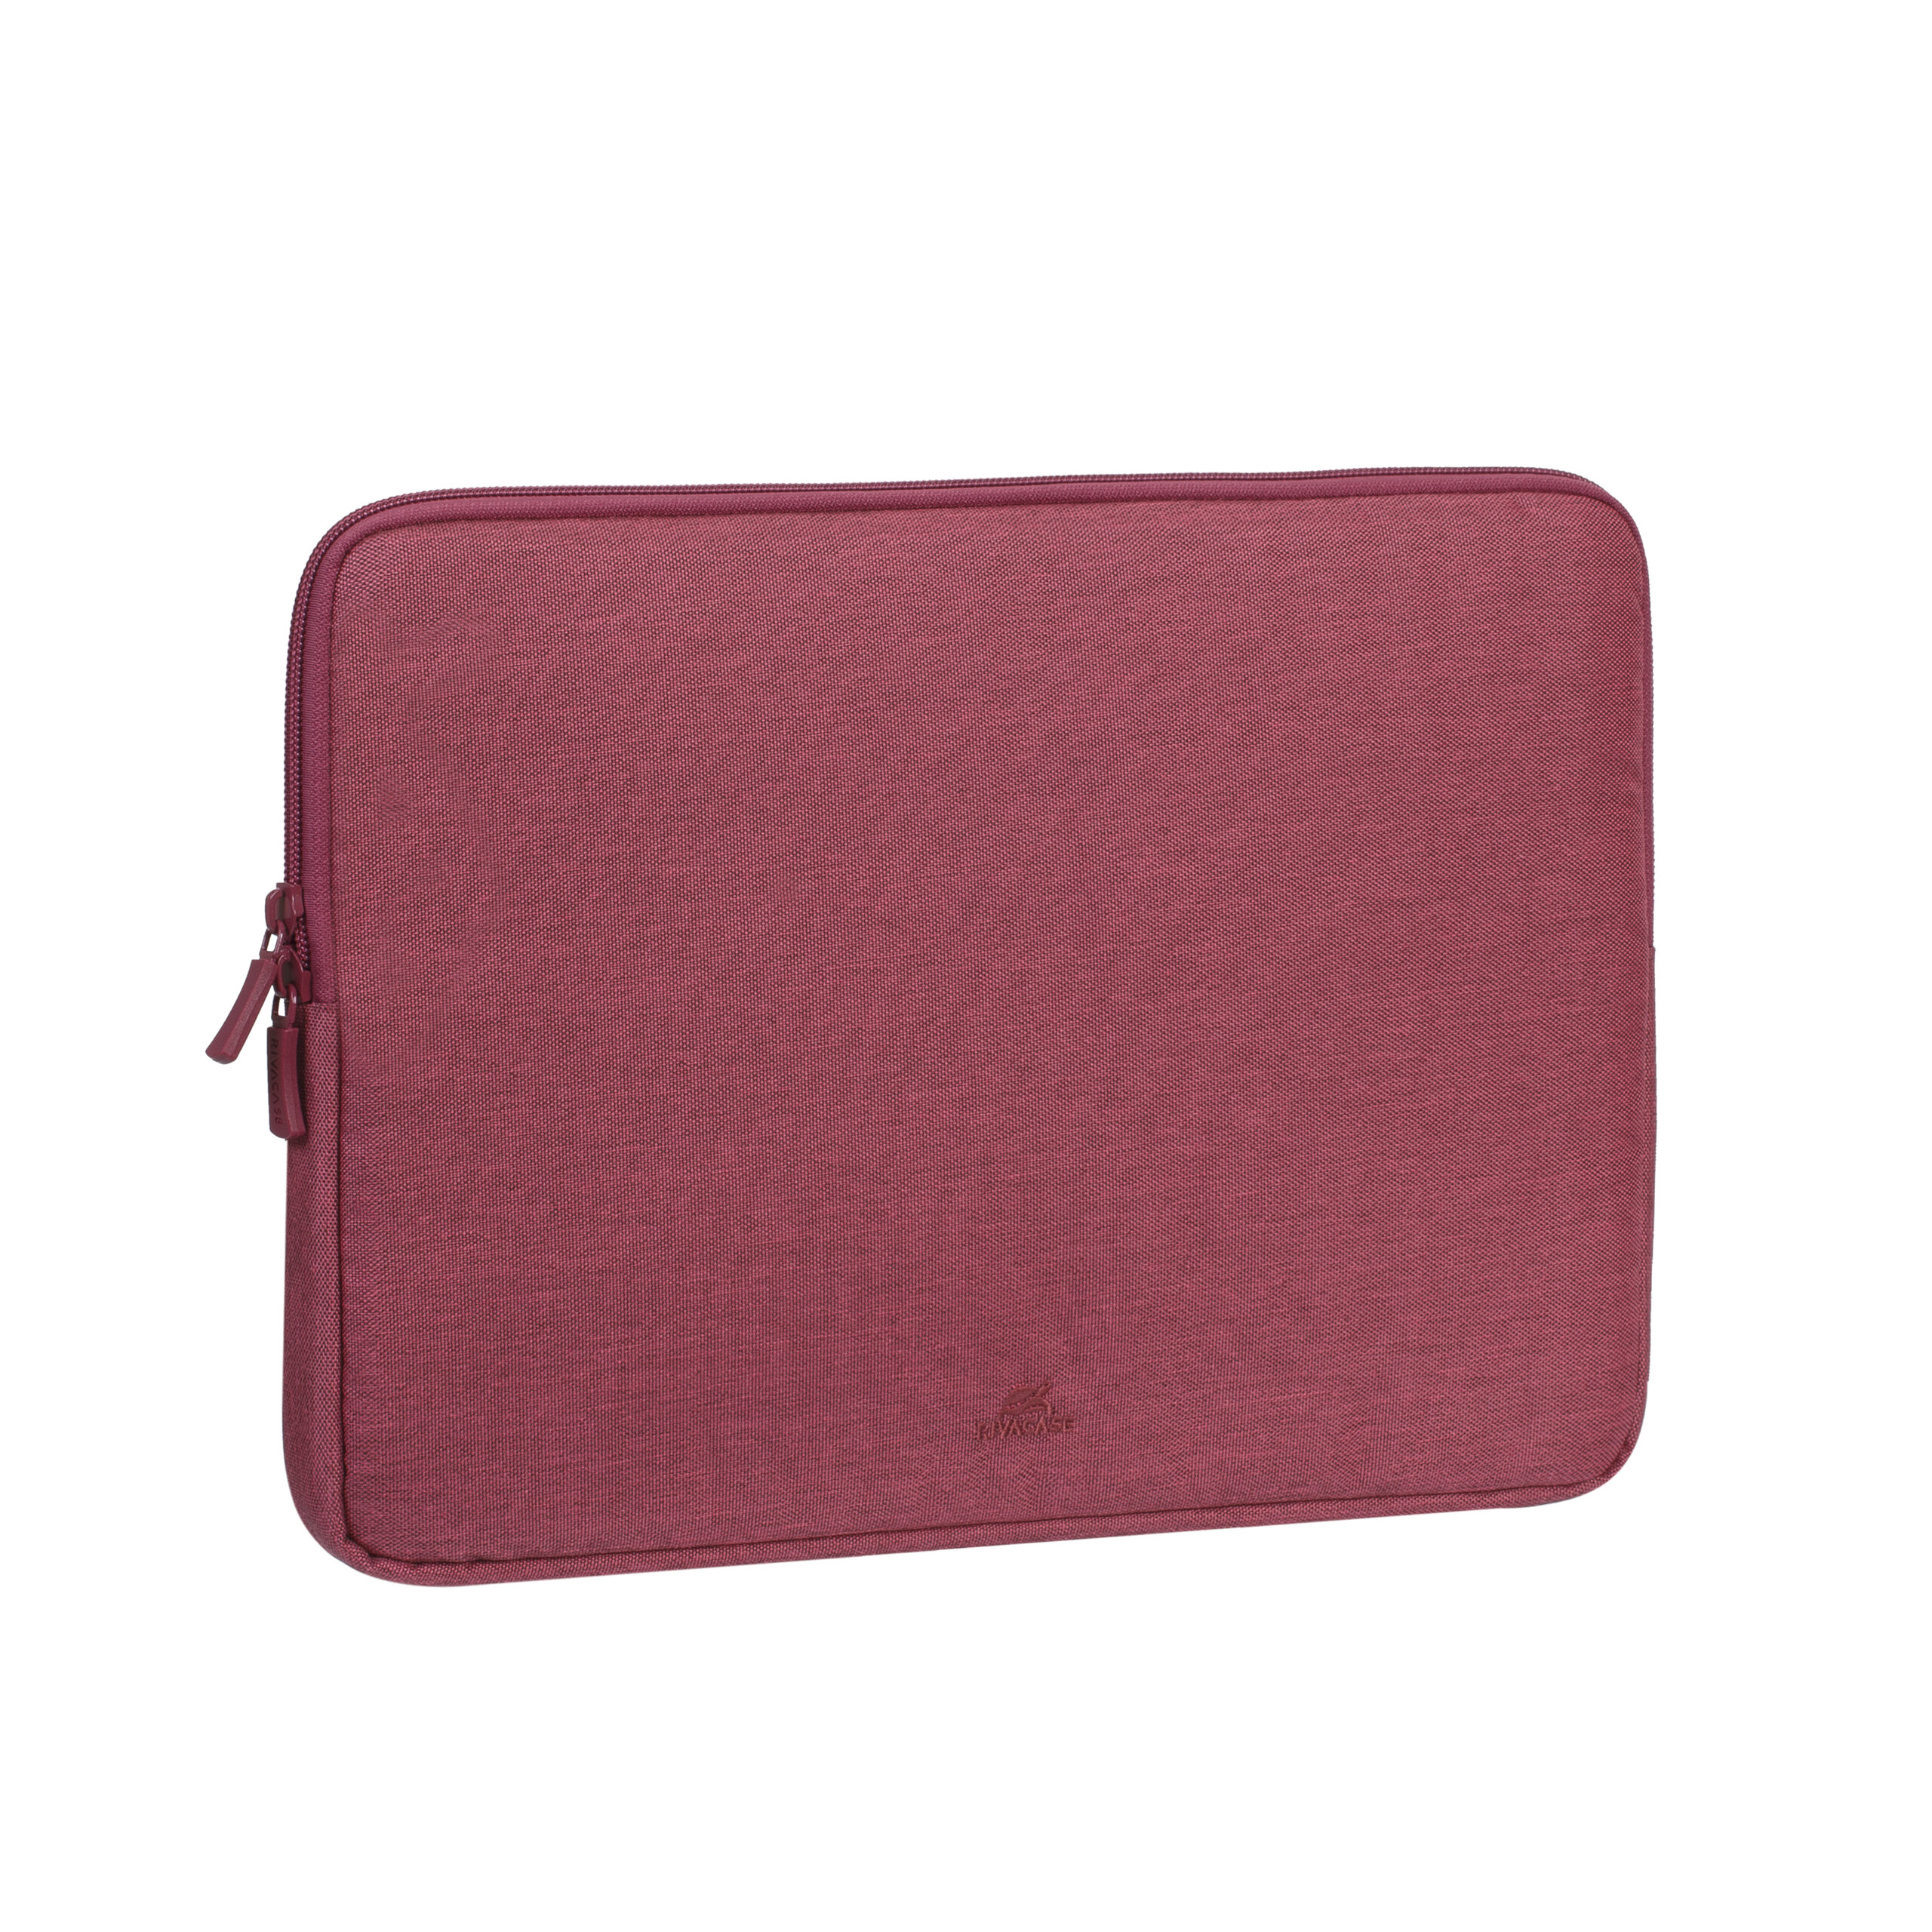 RIVACASE 7703 red Laptop sleeve 13.3″ / 12